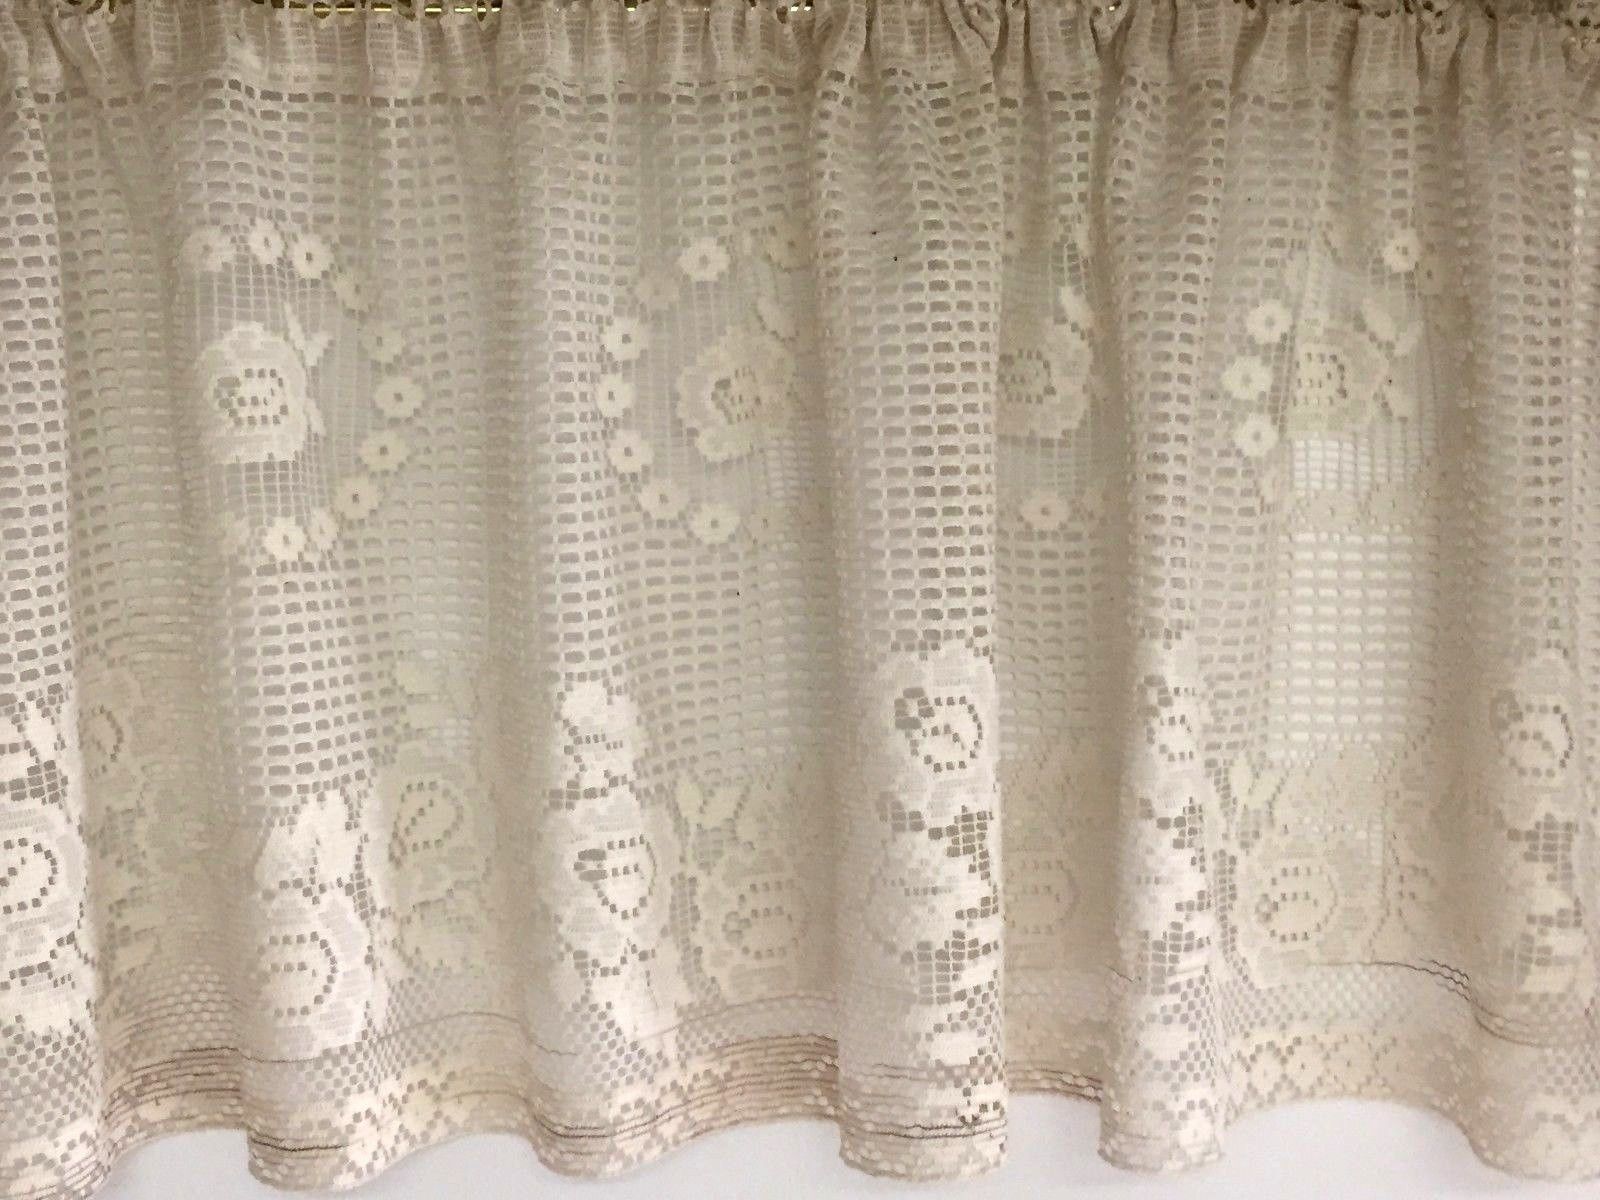 Ivory Lace Valance Basketweave Floral And 50 Similar Items Regarding Floral Lace Rod Pocket Kitchen Curtain Valance And Tiers Sets (View 17 of 20)